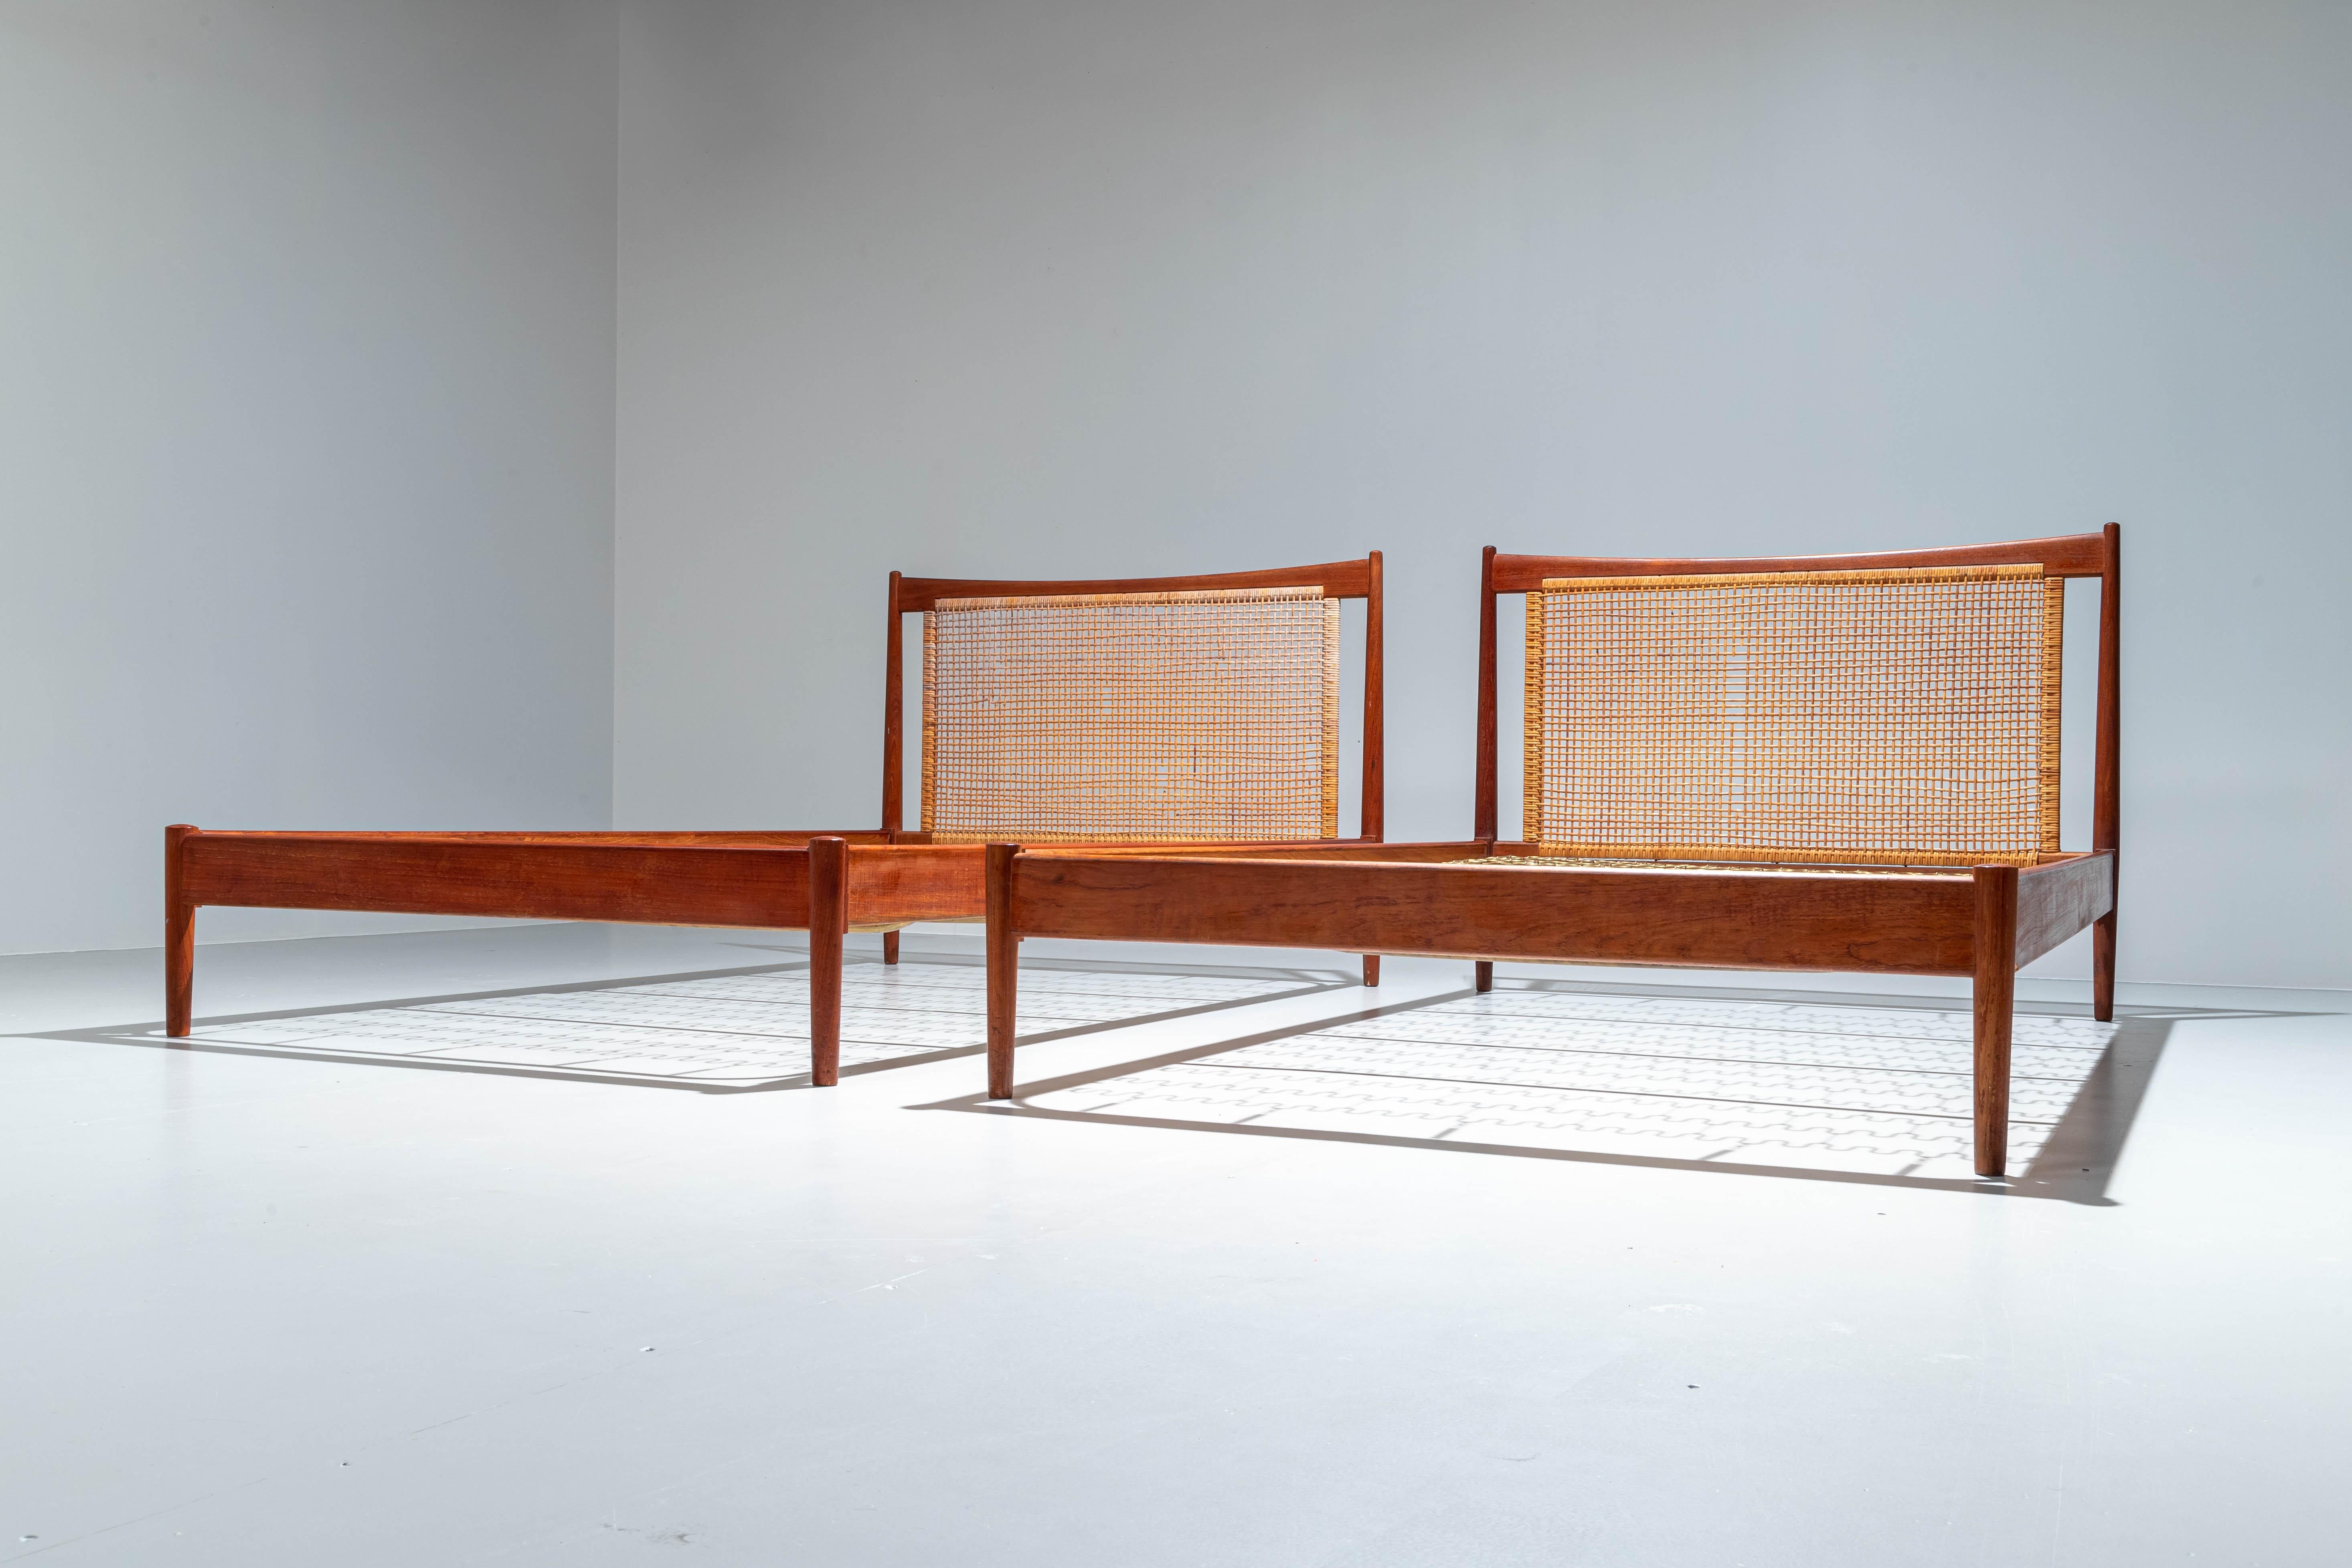 Set of two beds in Teak and Rattan by Børge Mogensen for Søborg Møbelfabrik, Denmark, 1960’s.

Beds: we all need them! We spend important hours in them. Why not sleep in a Børge Mogensen? The combination of organic materials like teak and rattan